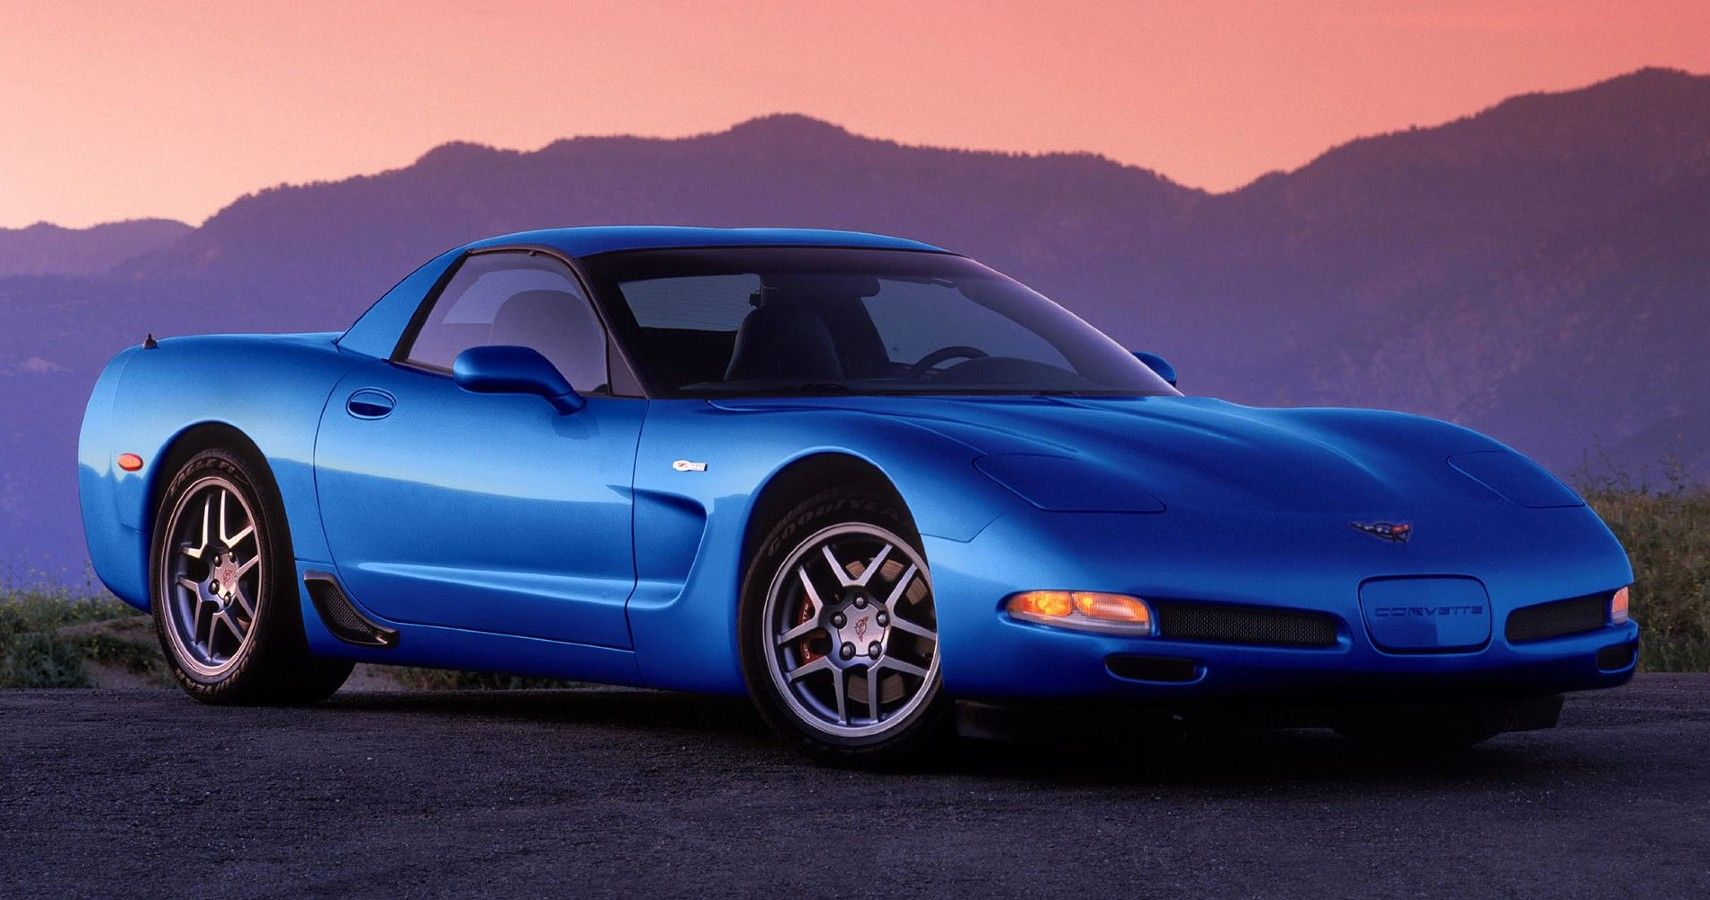 10 Collectible Cars Poised To Gain Value In 2023, According To Hagerty